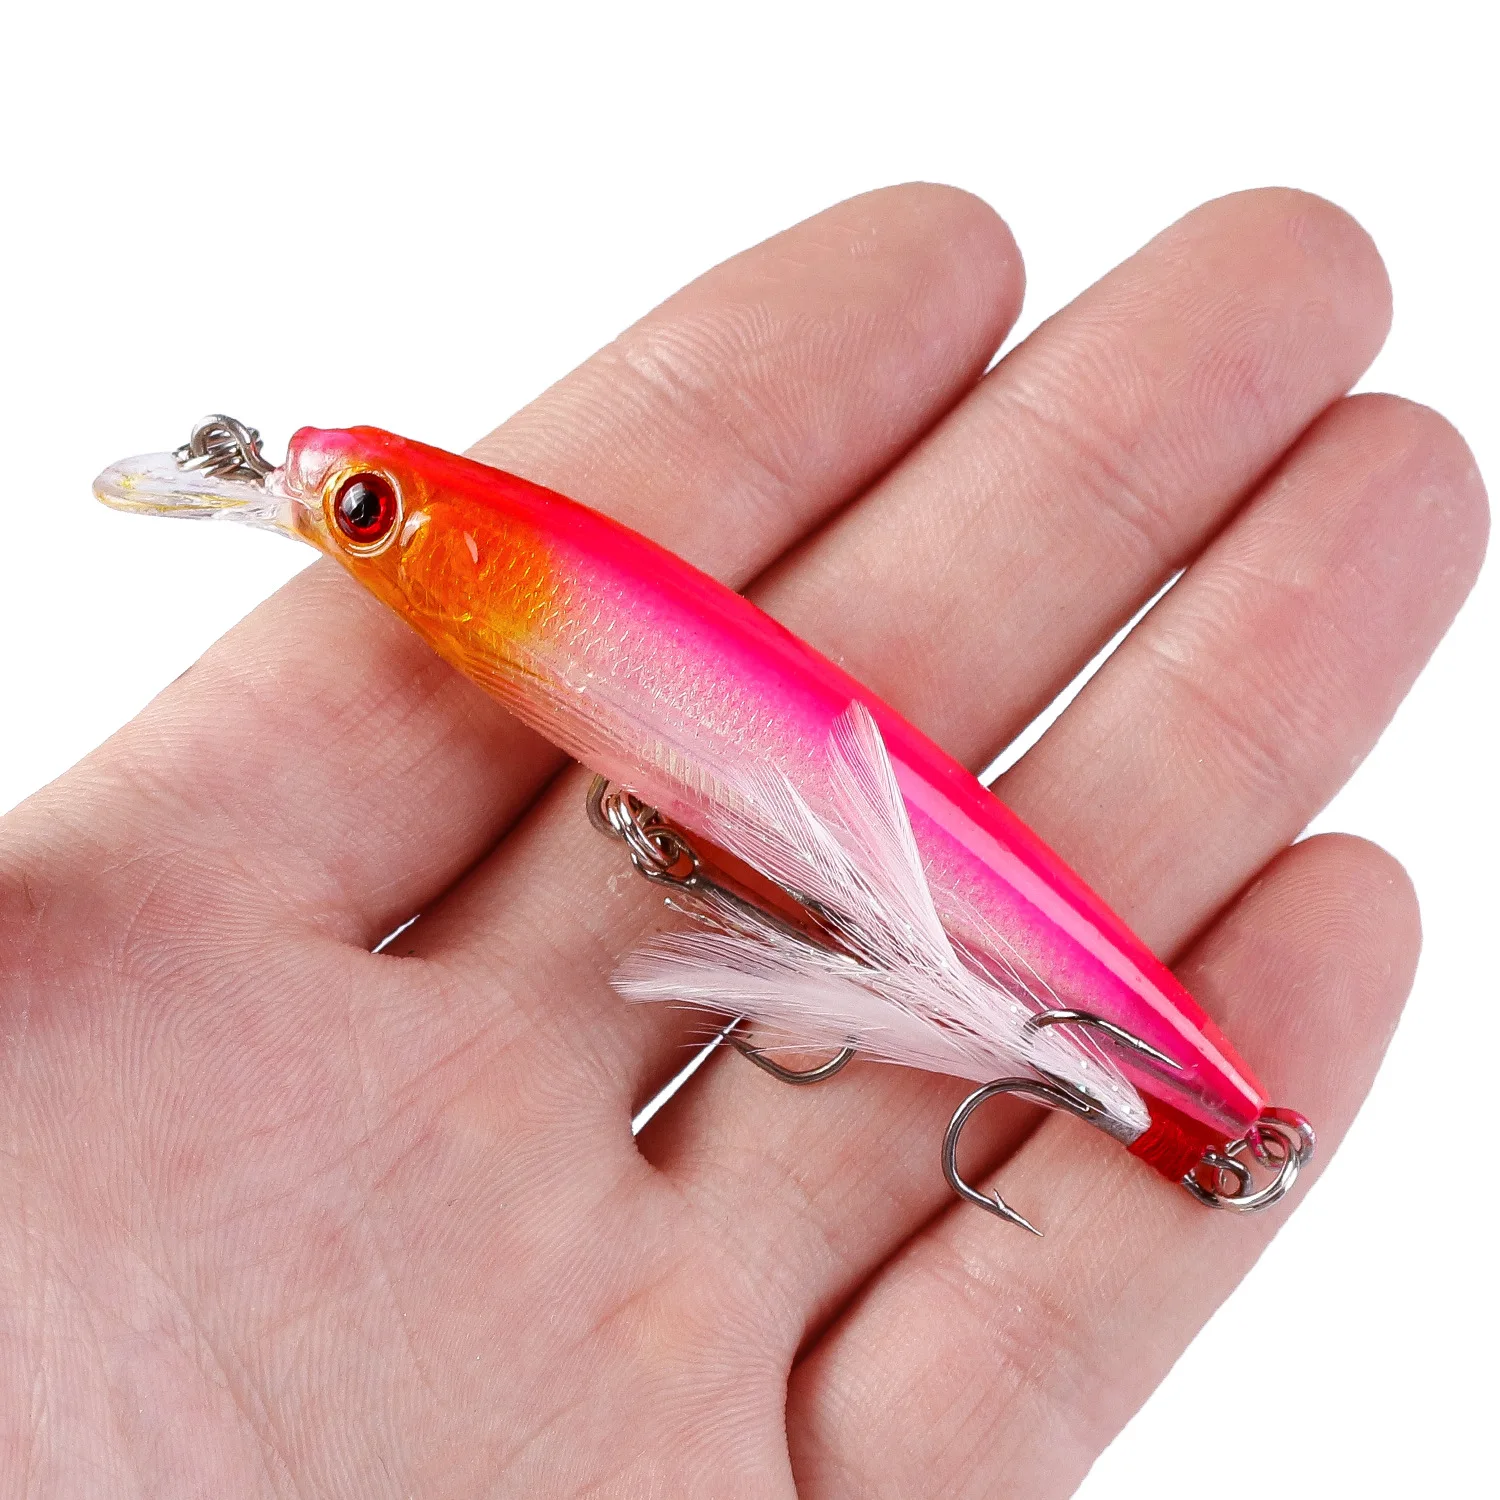 DHYJSFDC 1Pcs Laser 3D Eyes Bionic Minnow Fishing Lure 90mm 7.2g Artificial  Hard Bait with Feather Treble Hook Fishing Bait - AliExpress